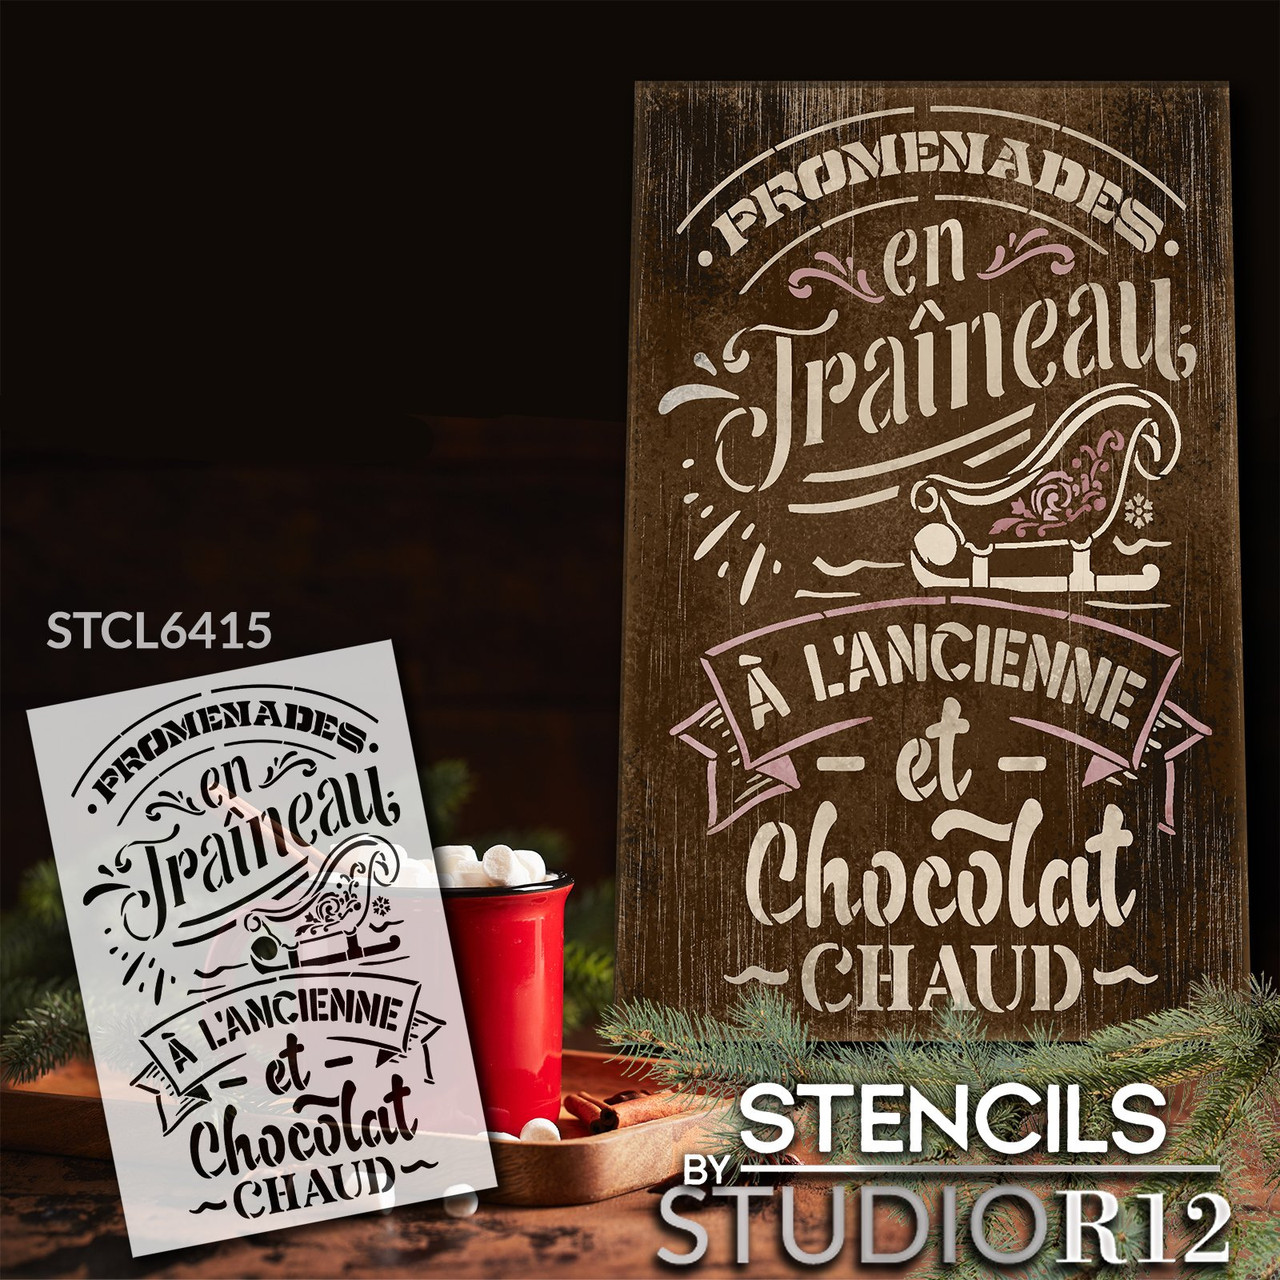 Promenades en Traineau with Sleigh Stencil by StudioR12 - Select Size - USA Made - Craft DIY Christmas Home Decor | Paint Winter Seasonal Wood Sign